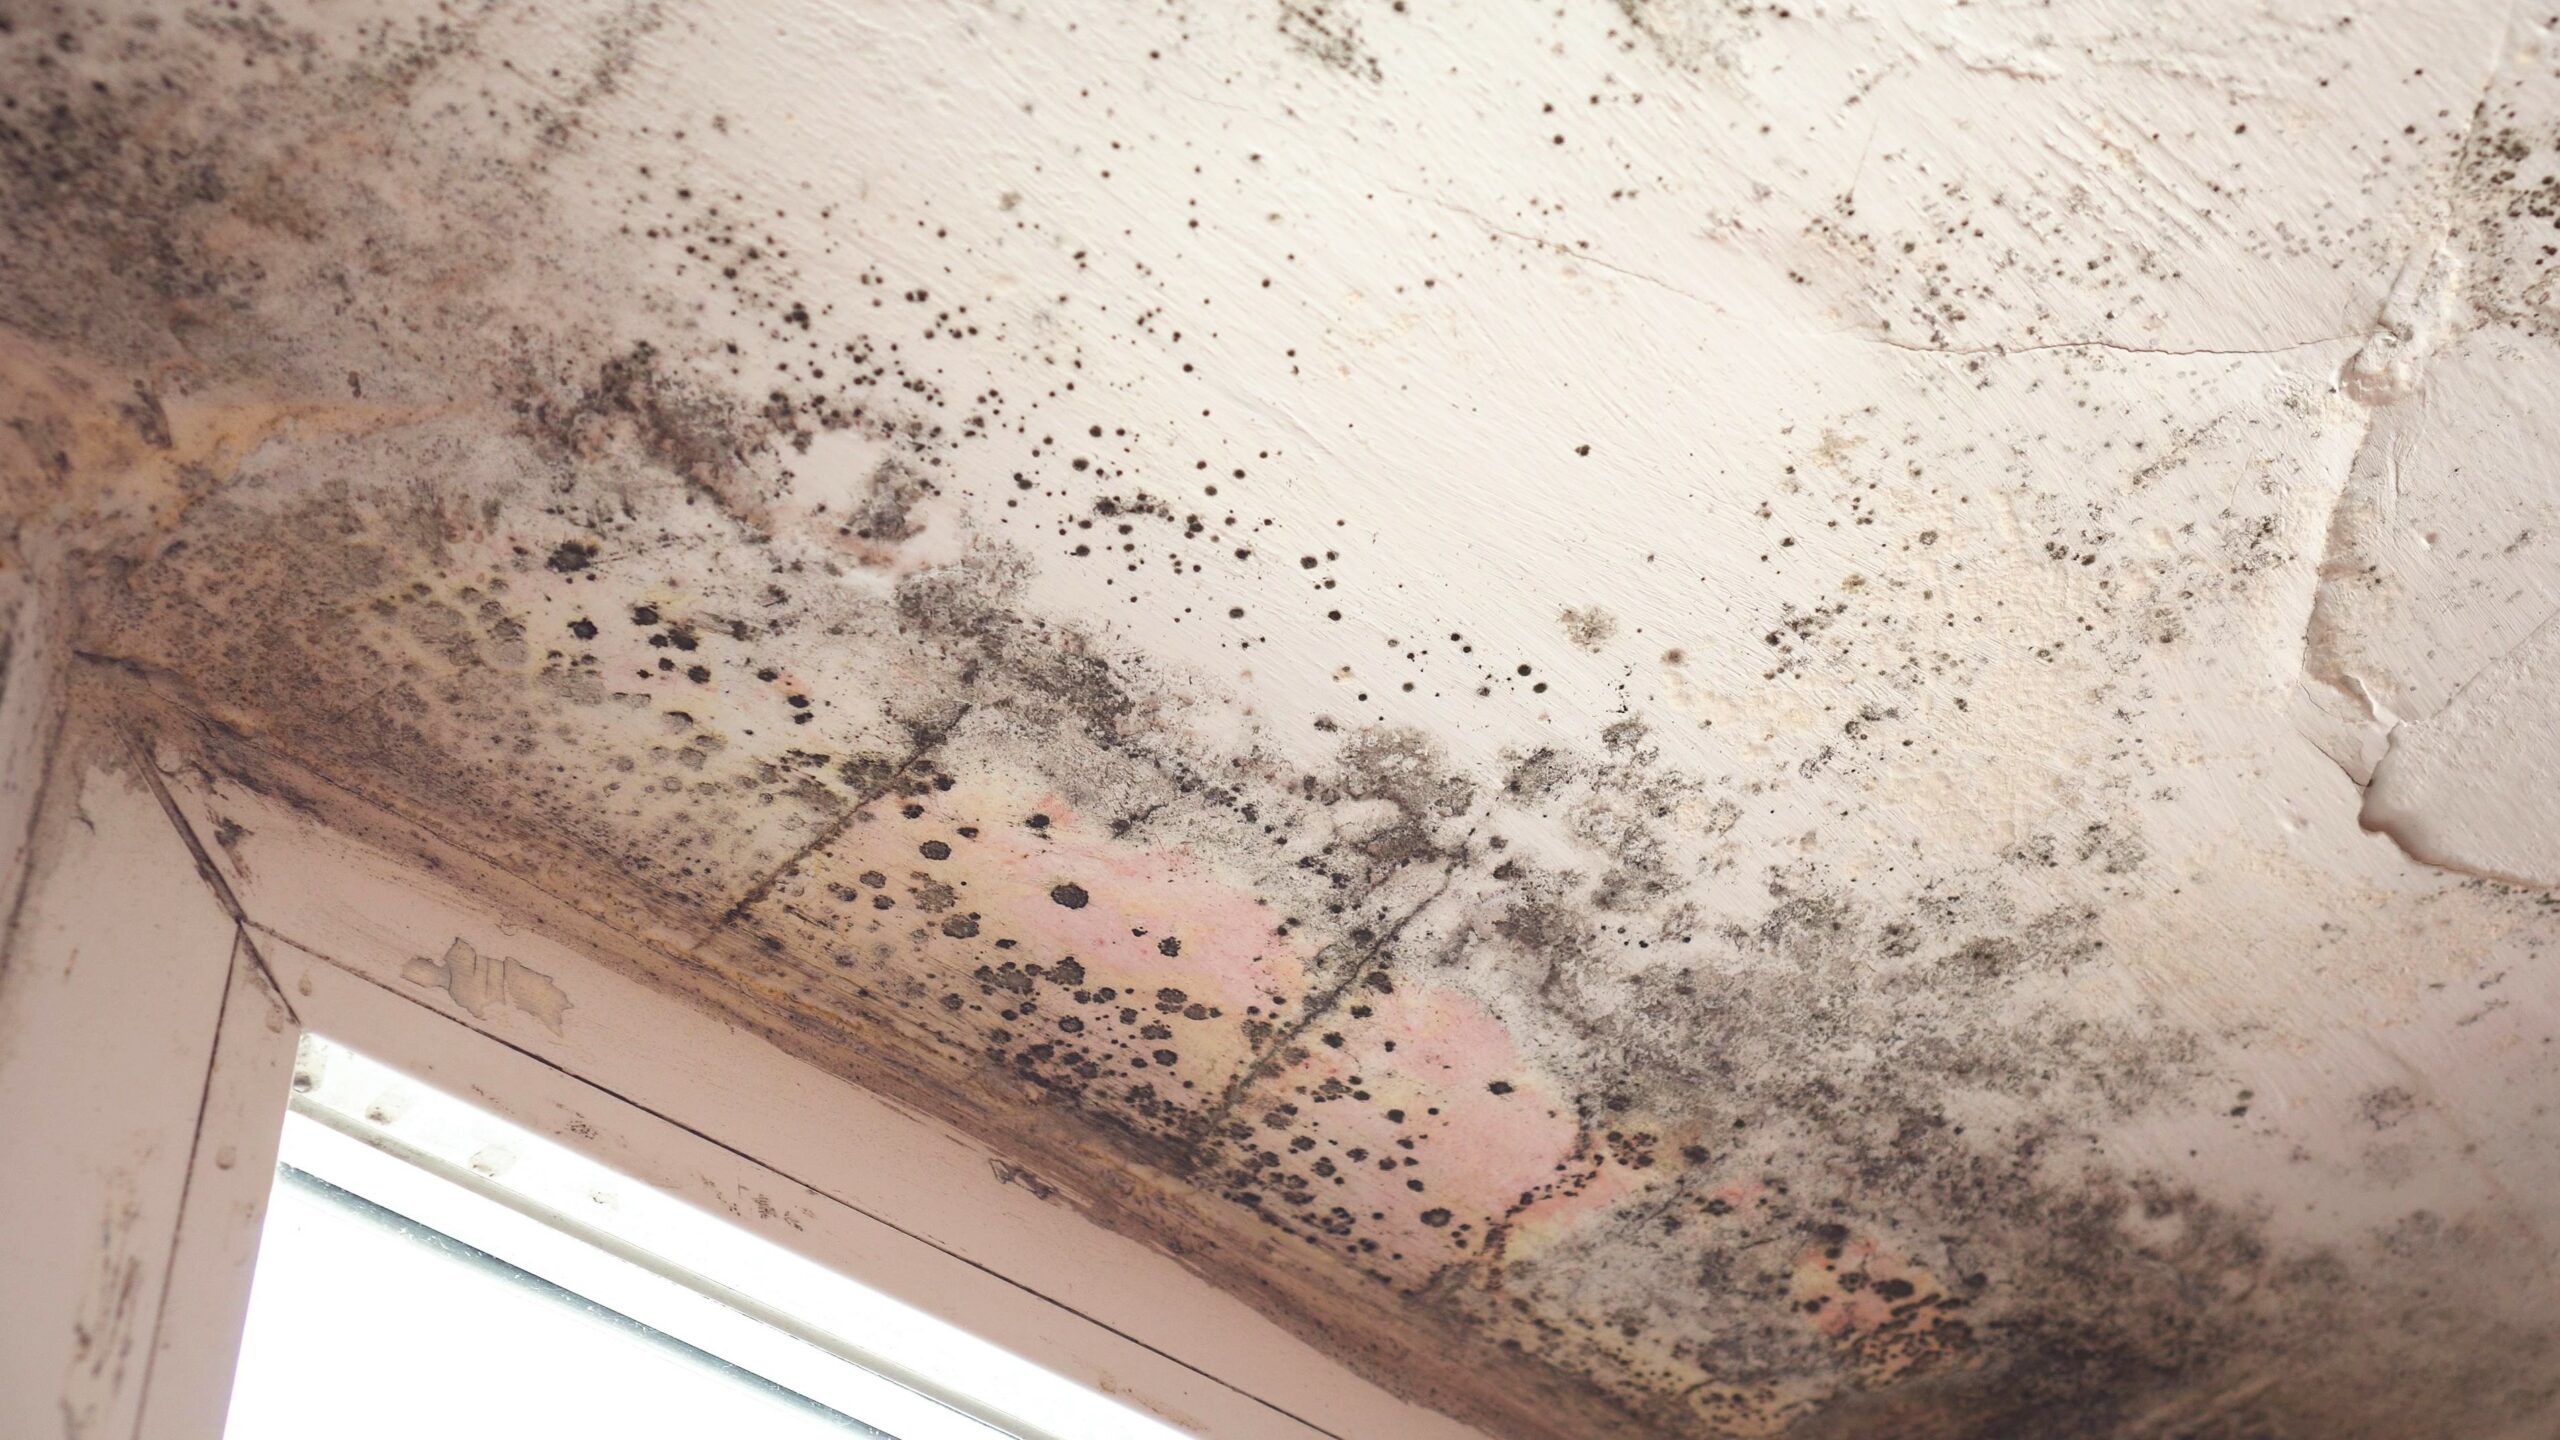 7 Steps to Mold Remediation | Bactronix